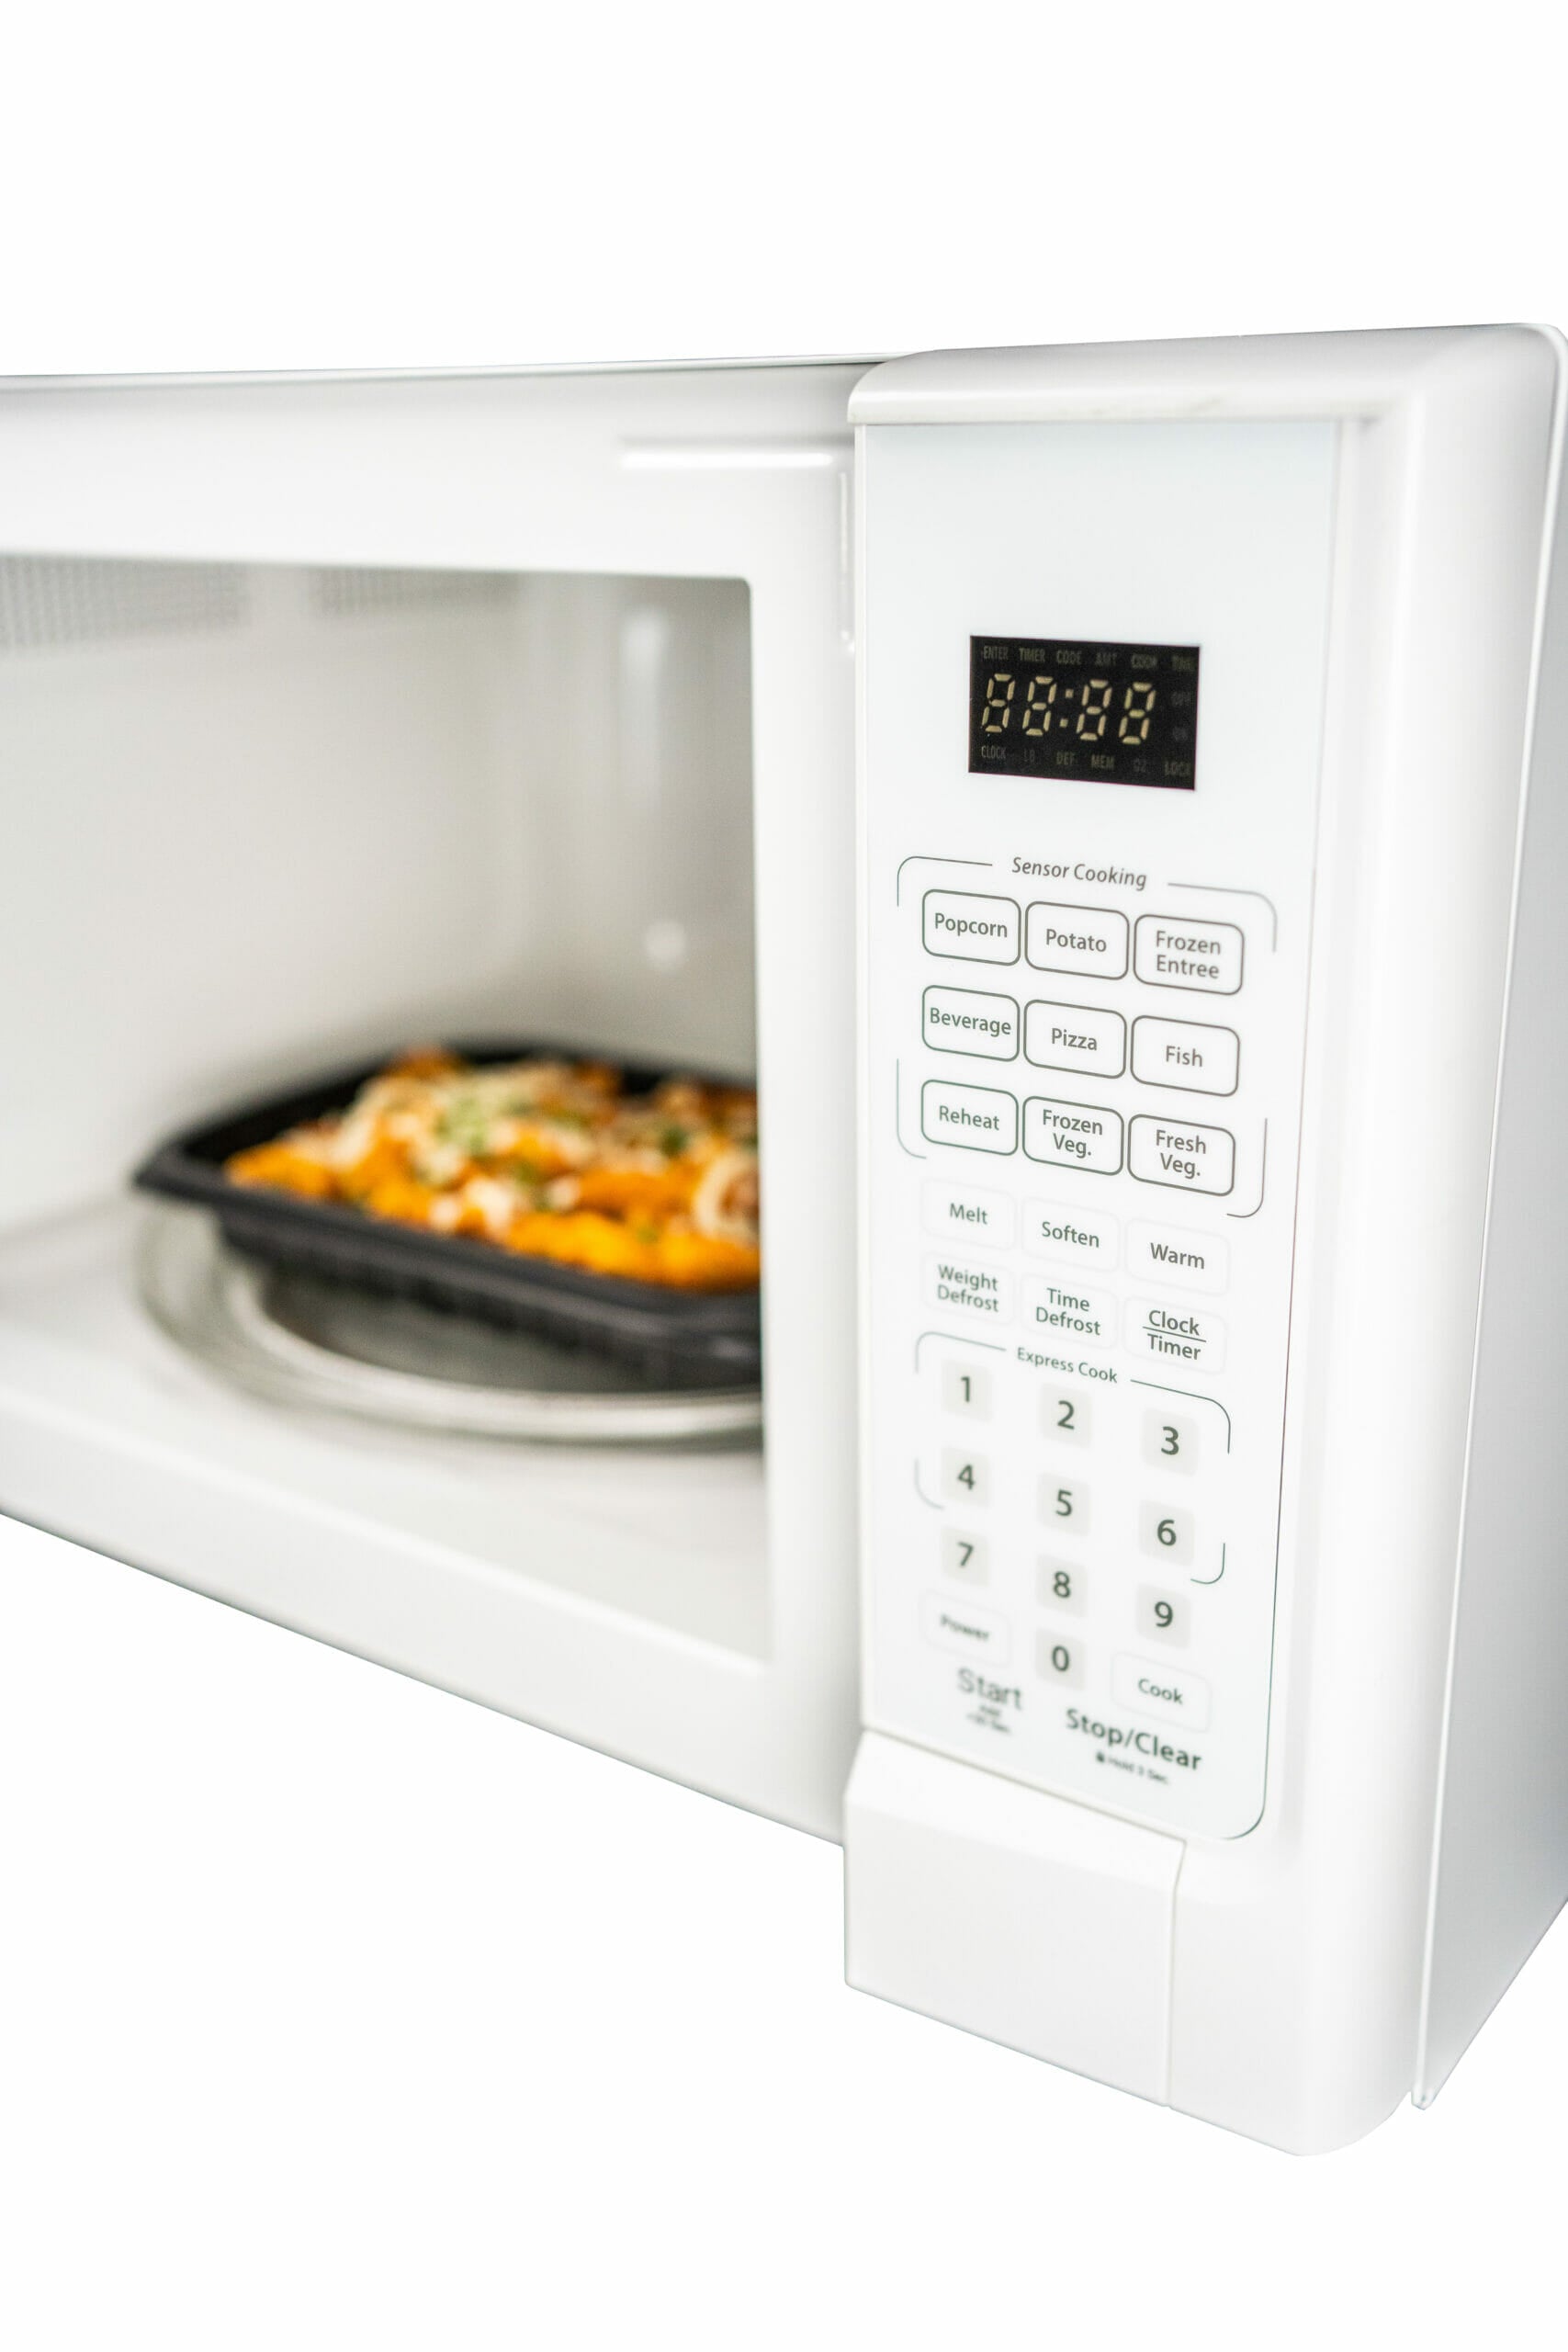 Danby - 1.4 cu. Ft  Counter top Microwave in White - DDMW01440WG1